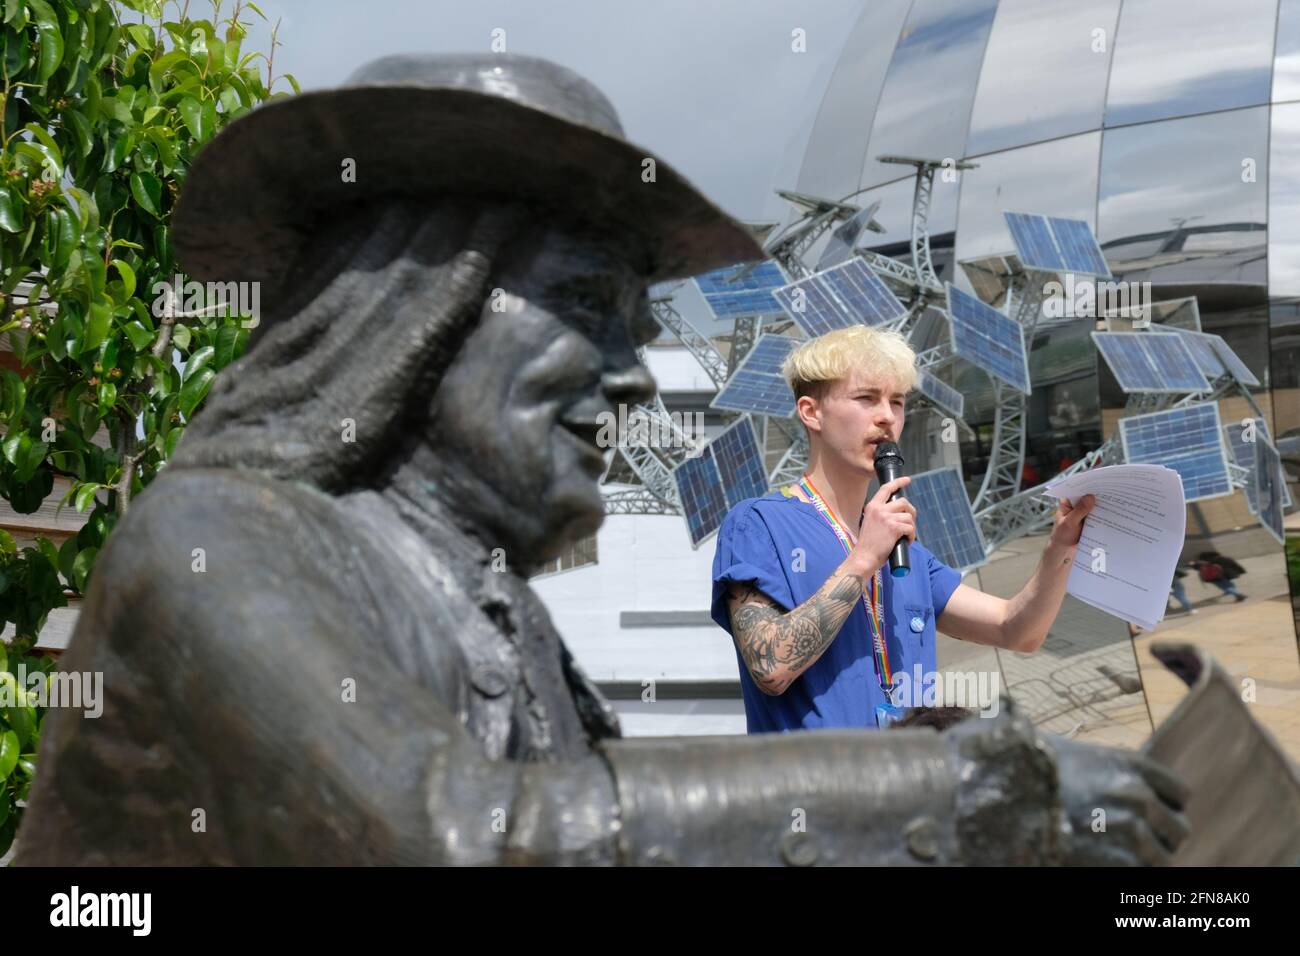 Bristol, UK. 15th May, 2021. The group “NHS Workers say no” met in Millenium Square Bristol to protest their poor pay. Speaker Alex Oldham framed by William Penn. They want a 15% restorative pay rise to make up for years of austerity. Credit: JMF News/Alamy Live News Stock Photo